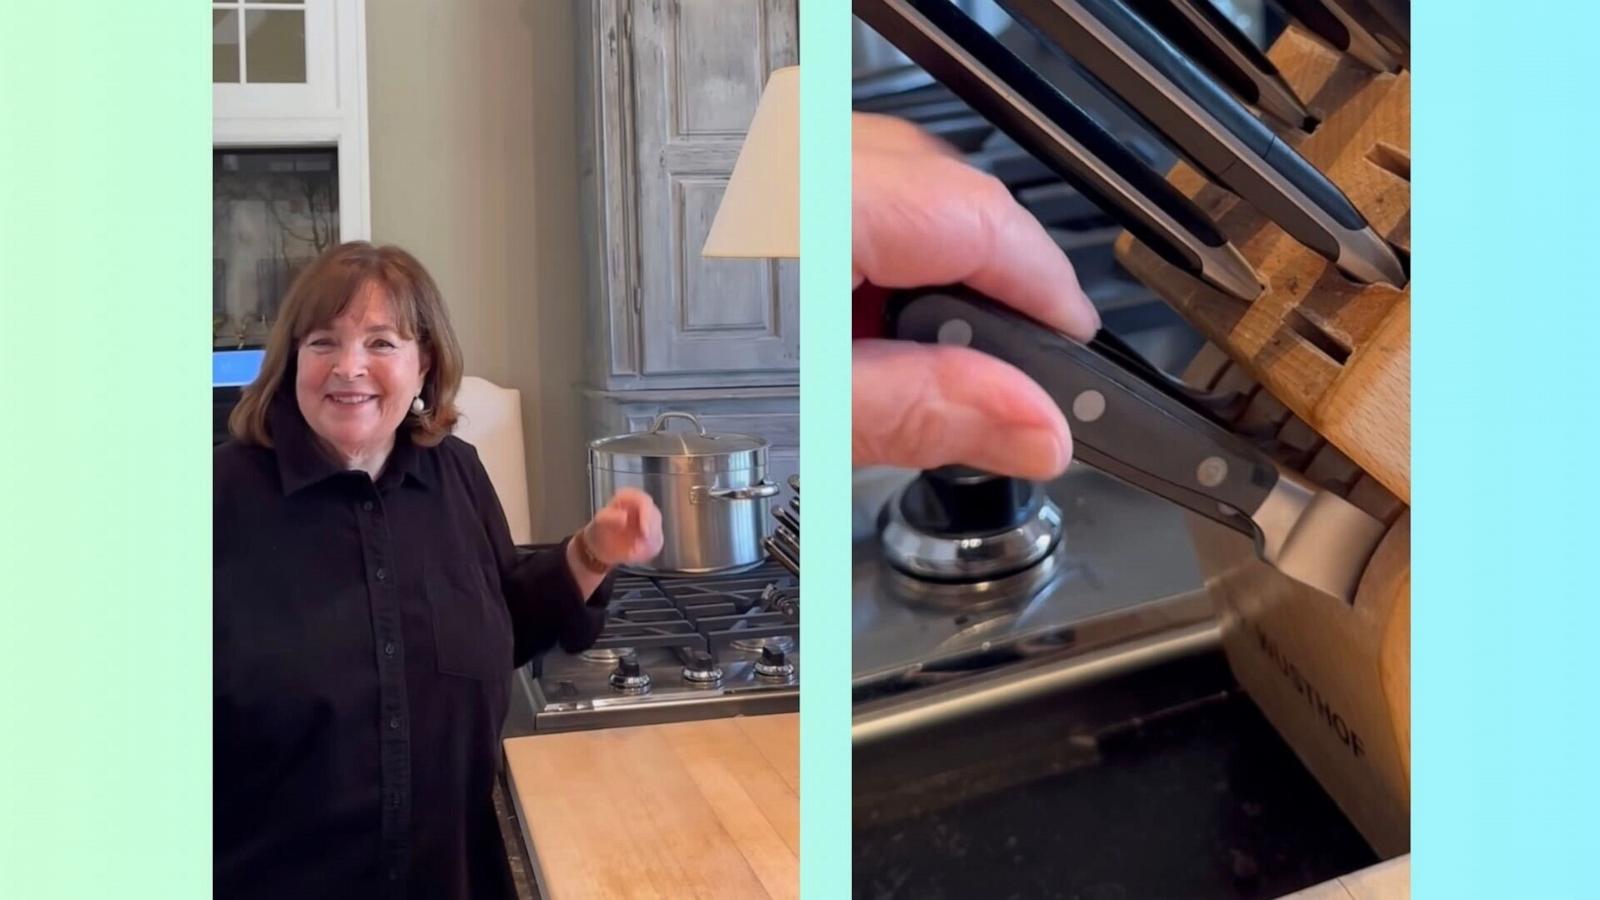 Ina Garten Puts Her Knives in the Dishwasher—Should You?